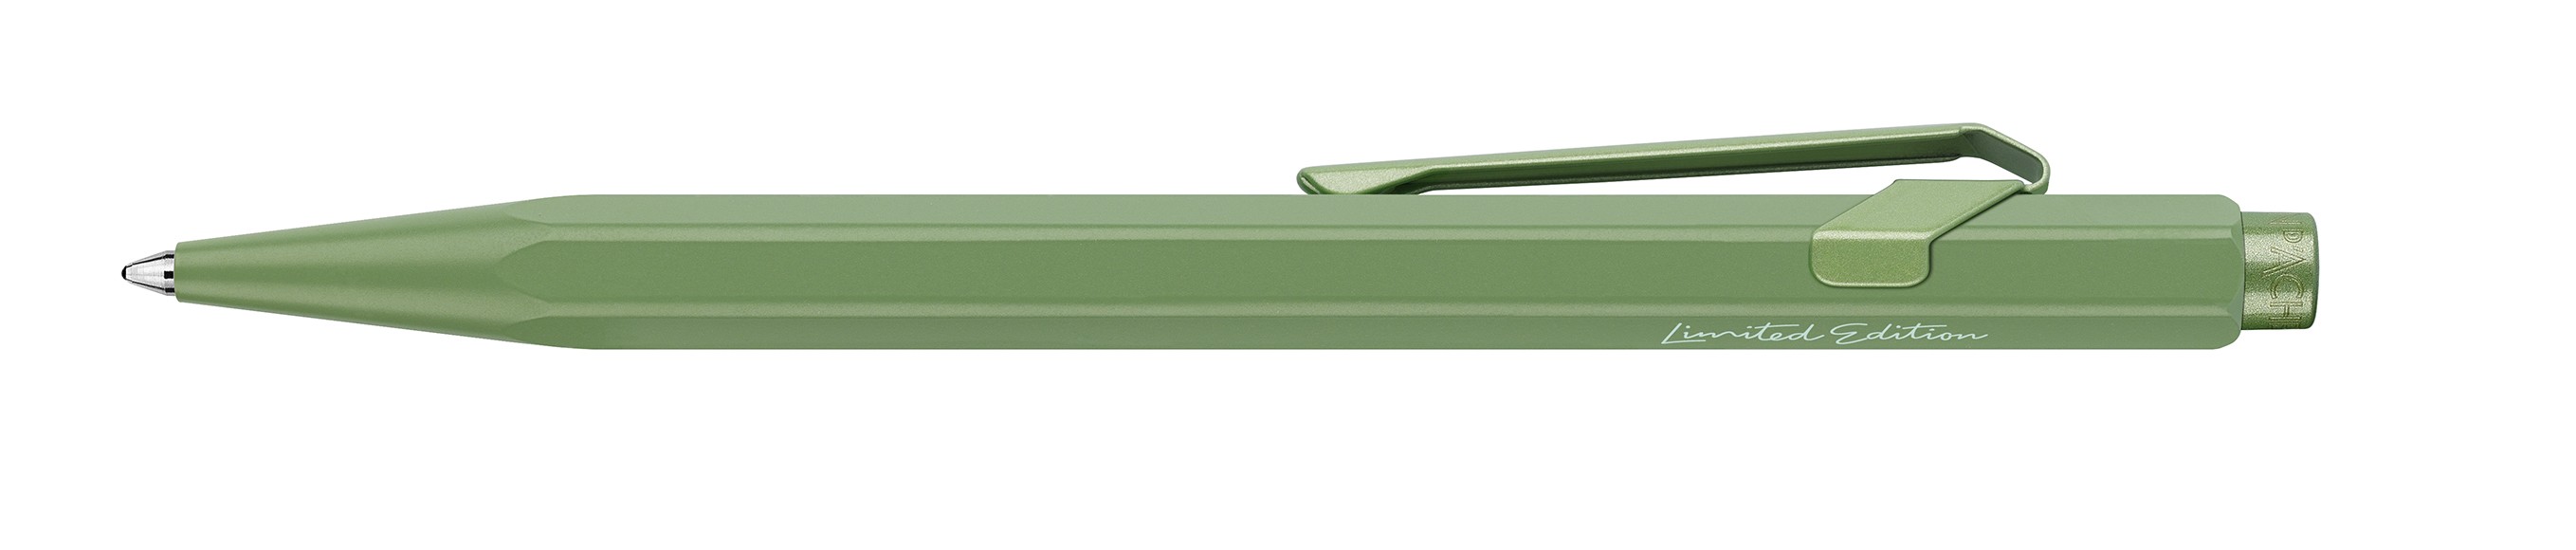 Caran d'Ache 849 Claim Your Style 4 Limited Edition Clay Green Ballpoint